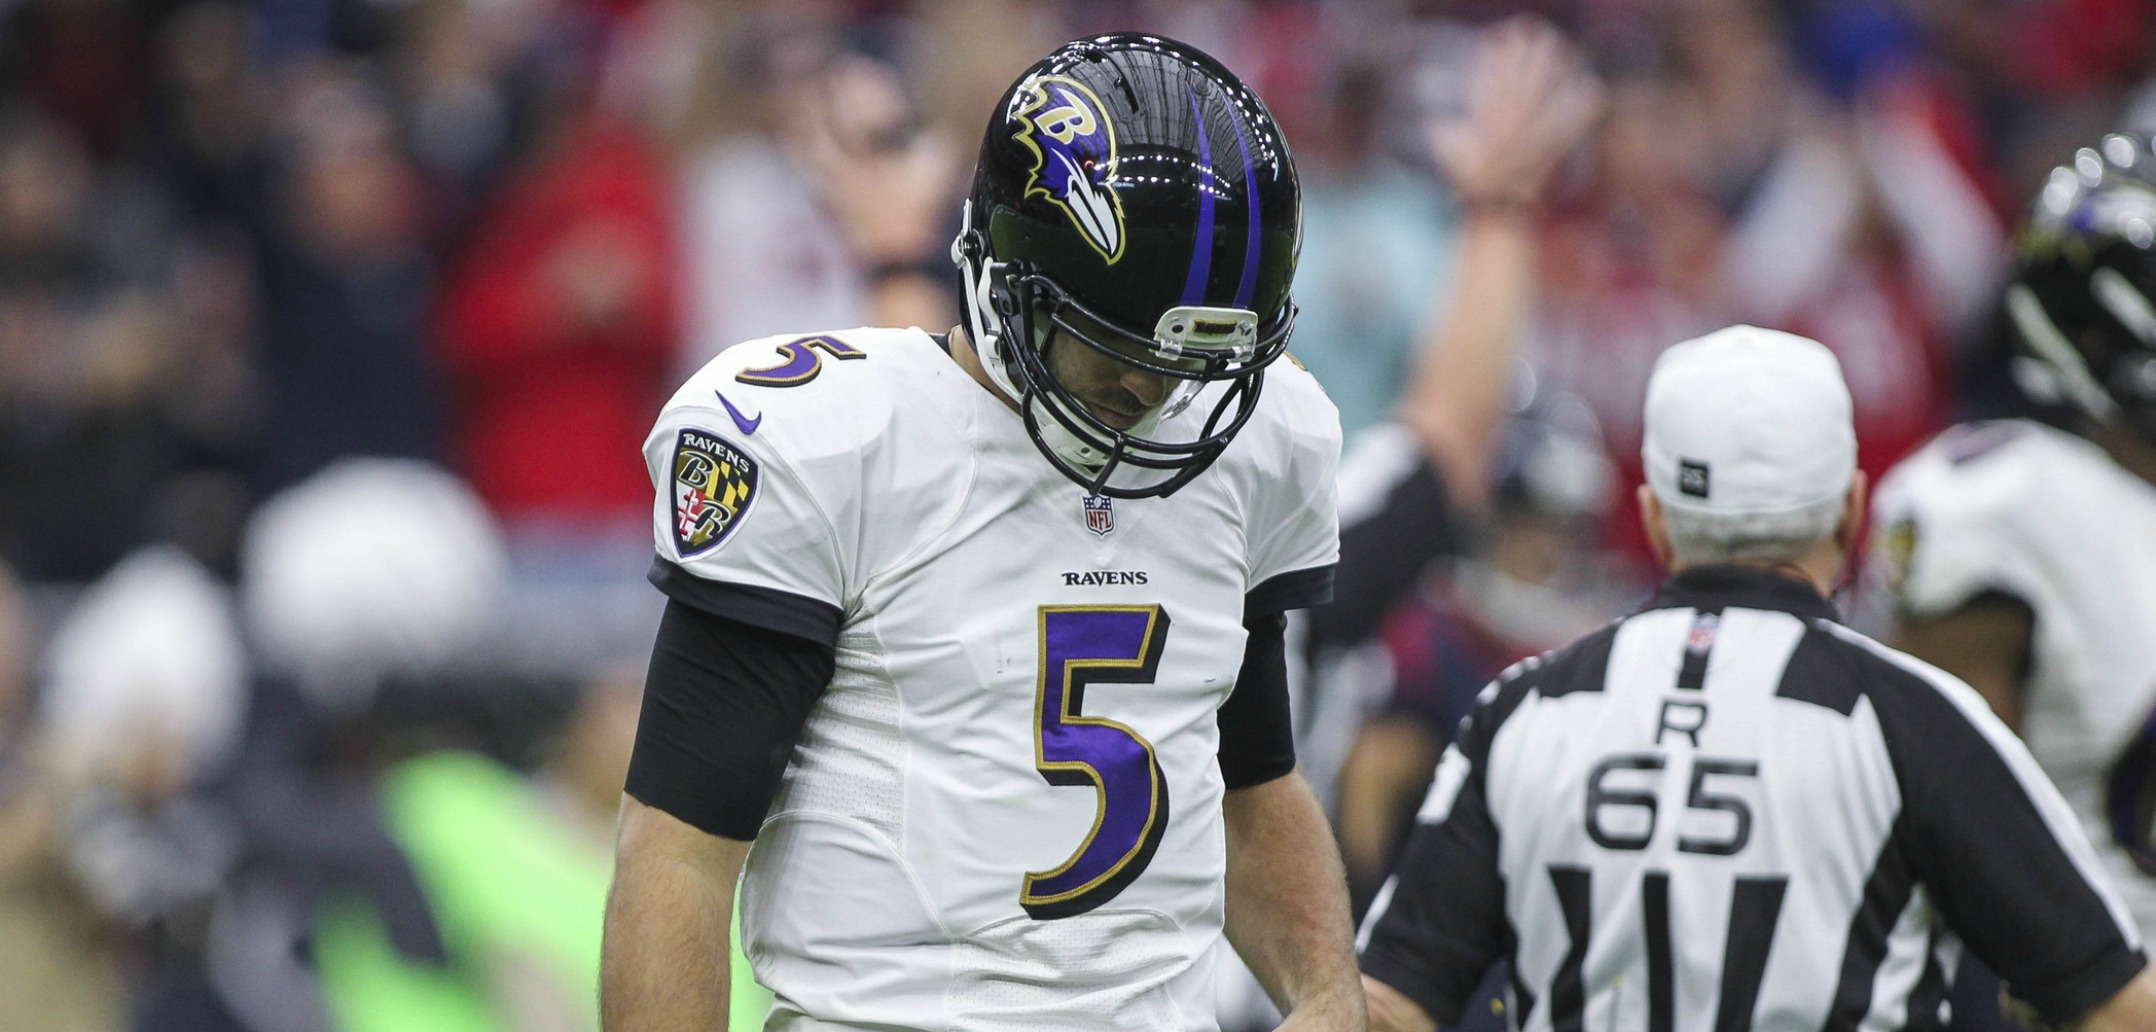 Courtesy of USA Today: Joe Flacco needs a rebound performance to give Baltimore a shot at the playoffs.